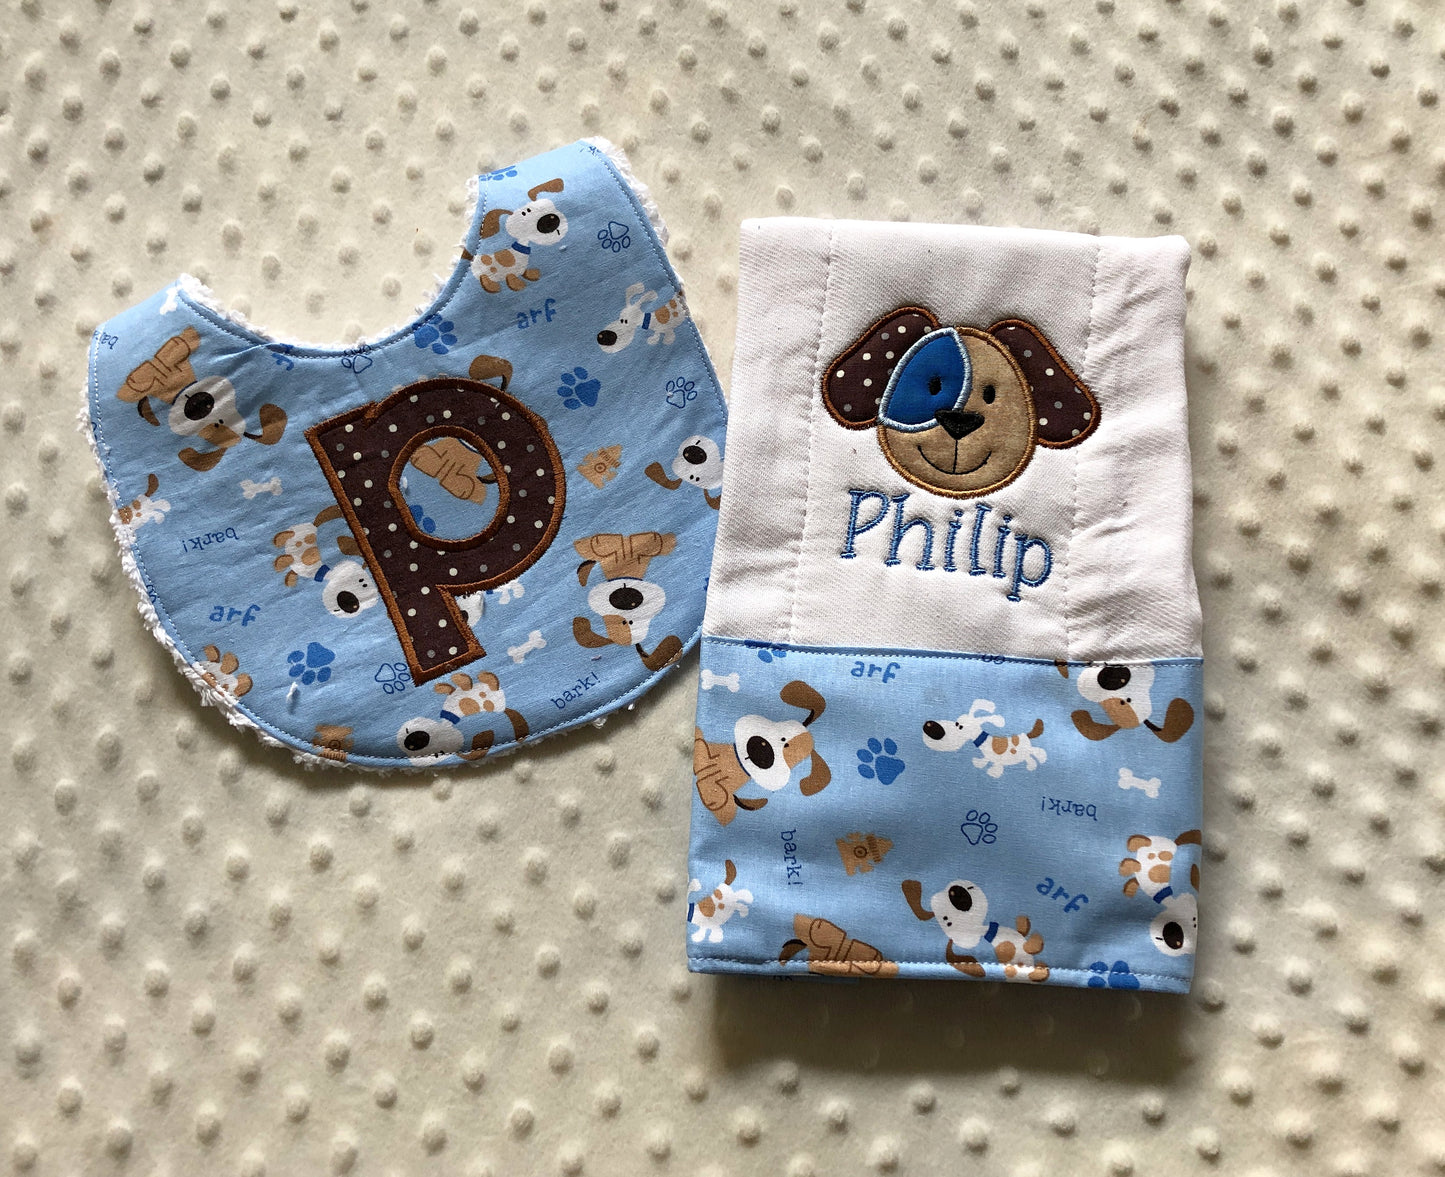 Personalized Puppy Theme Baby Shower Gift Set: Bib and Burp Cloth